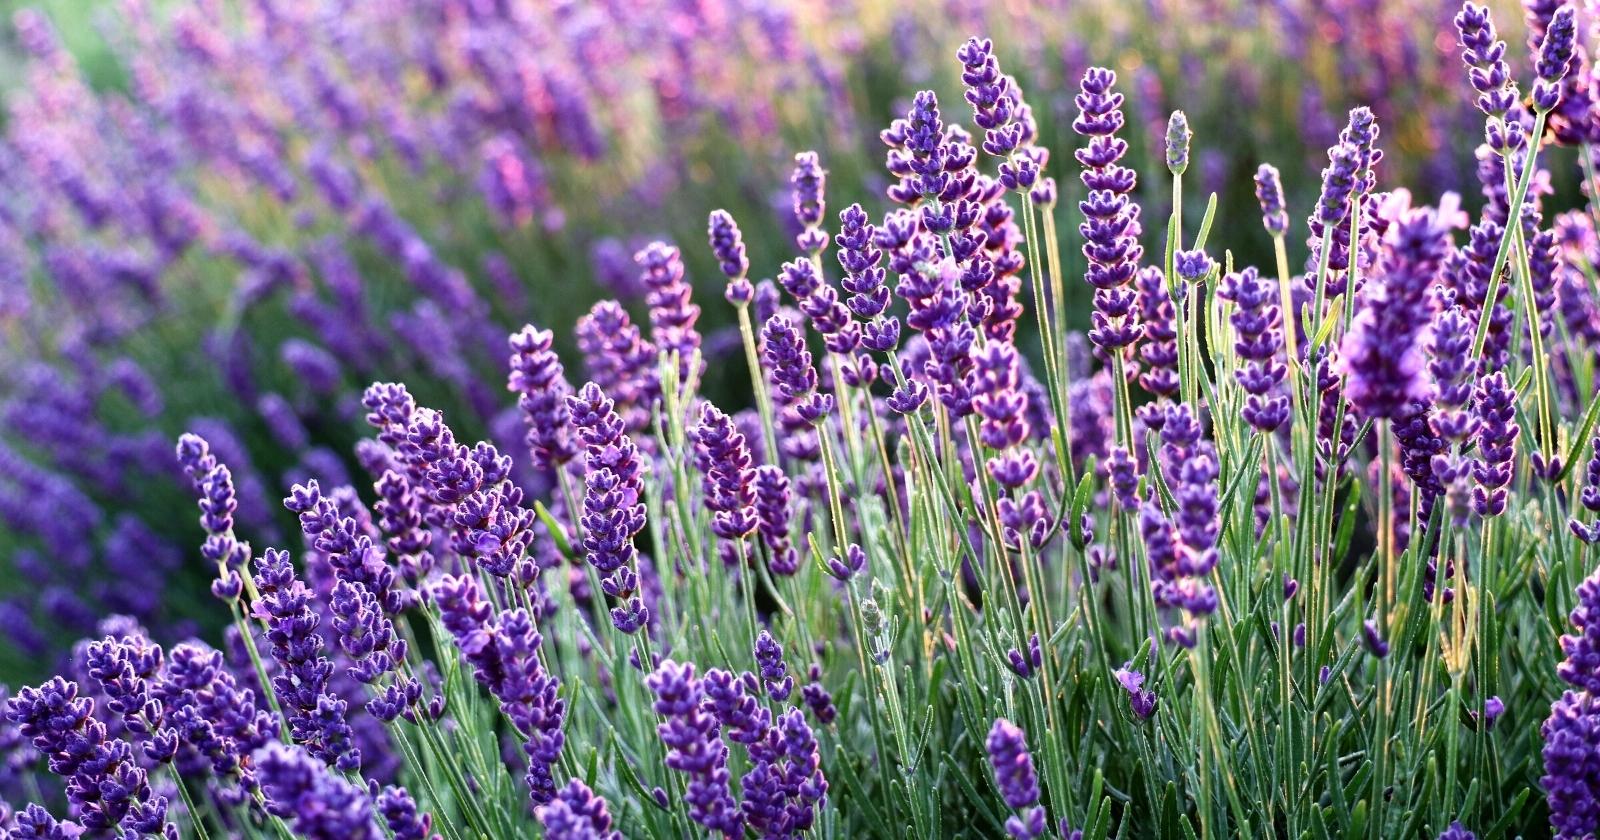 Field of tall green stalks with small purple clusters of flowers on top.